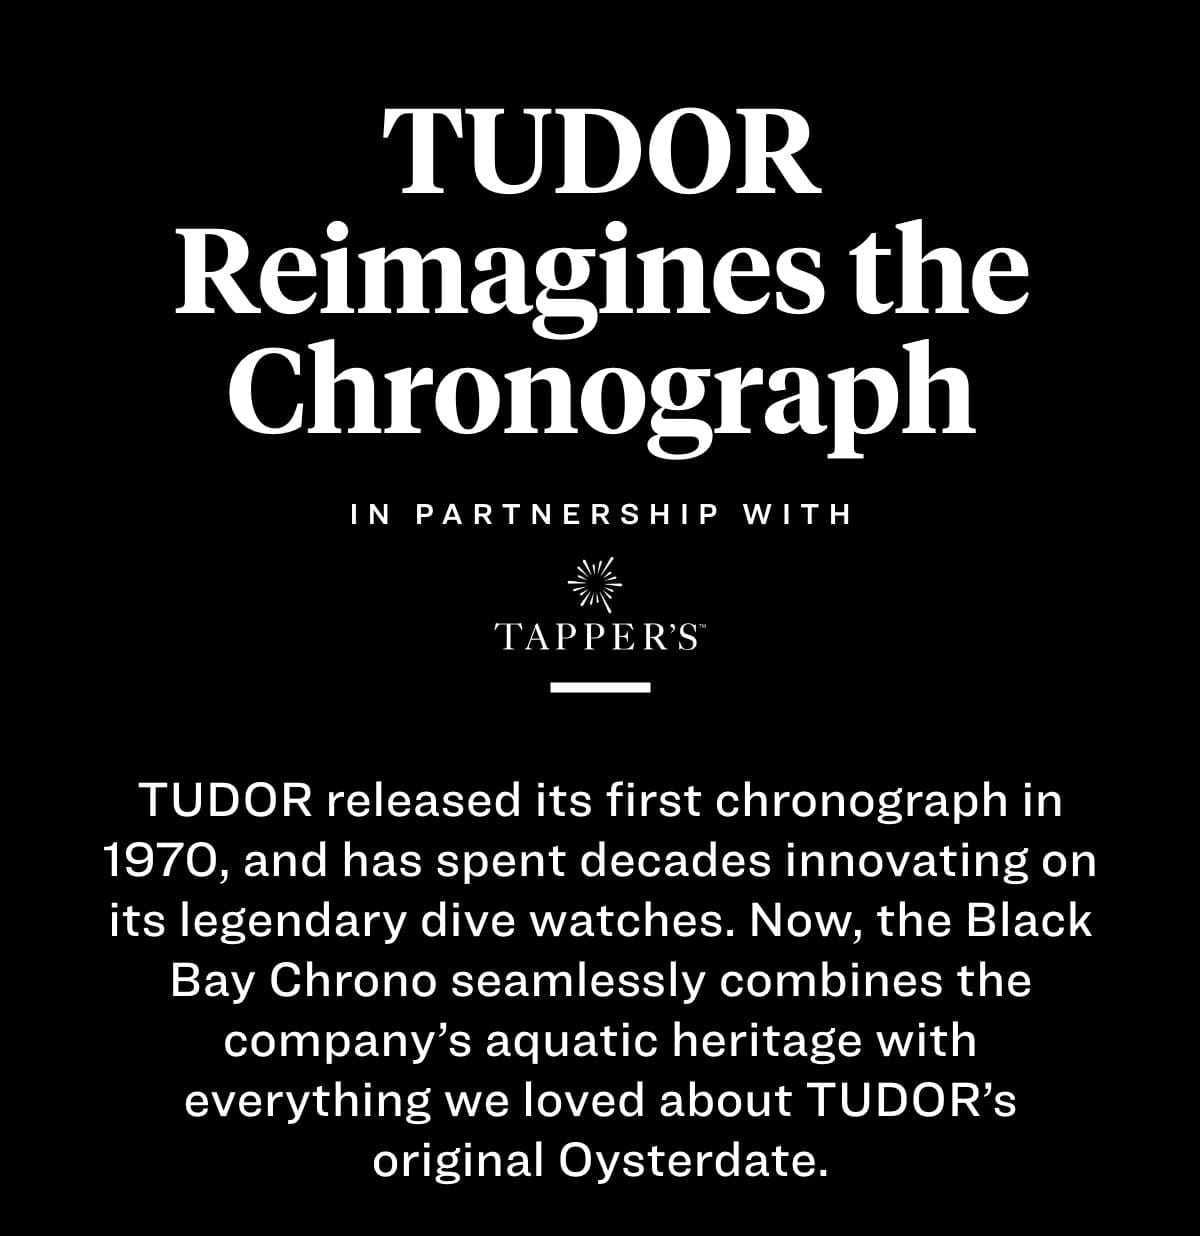 TUDOR Reimagines the Chronograph TUDOR released its first chronograph in 1970, and has spent decades innovating on its legendary dive watches. Now, the Black Bay Chrono seamlessly combines the company’s aquatic heritage with everything we loved about TUDOR’s original Oysterdate.